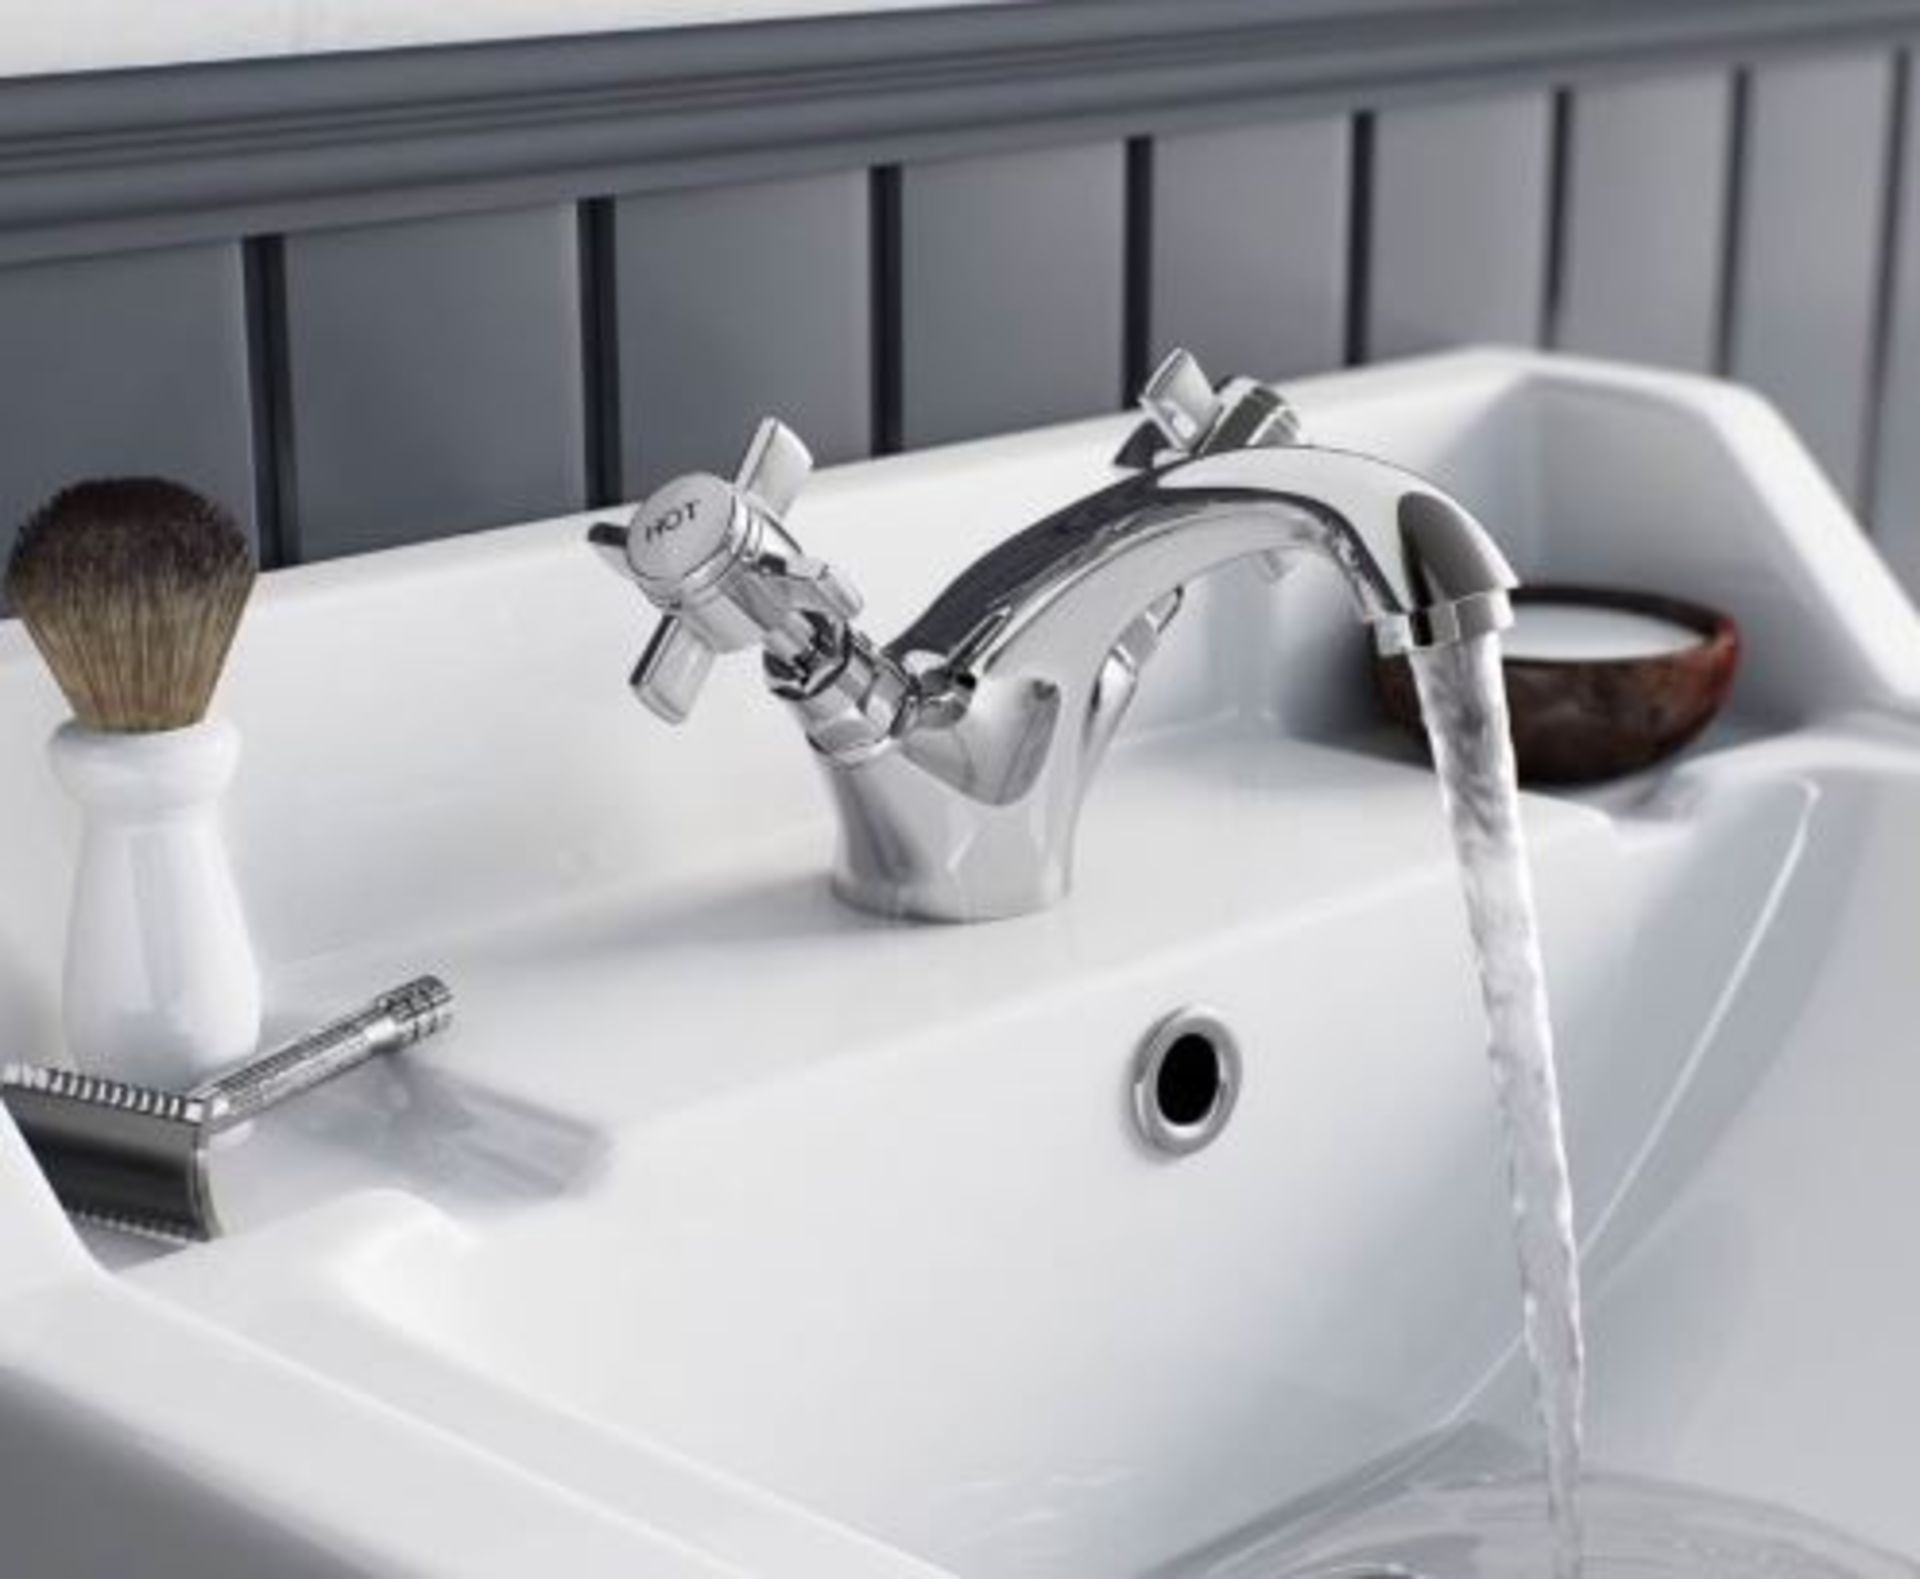 . RRP £99. Orchard Dulwich basin mixer tap Product code: HAMP01. Appears New Unused. https://victor